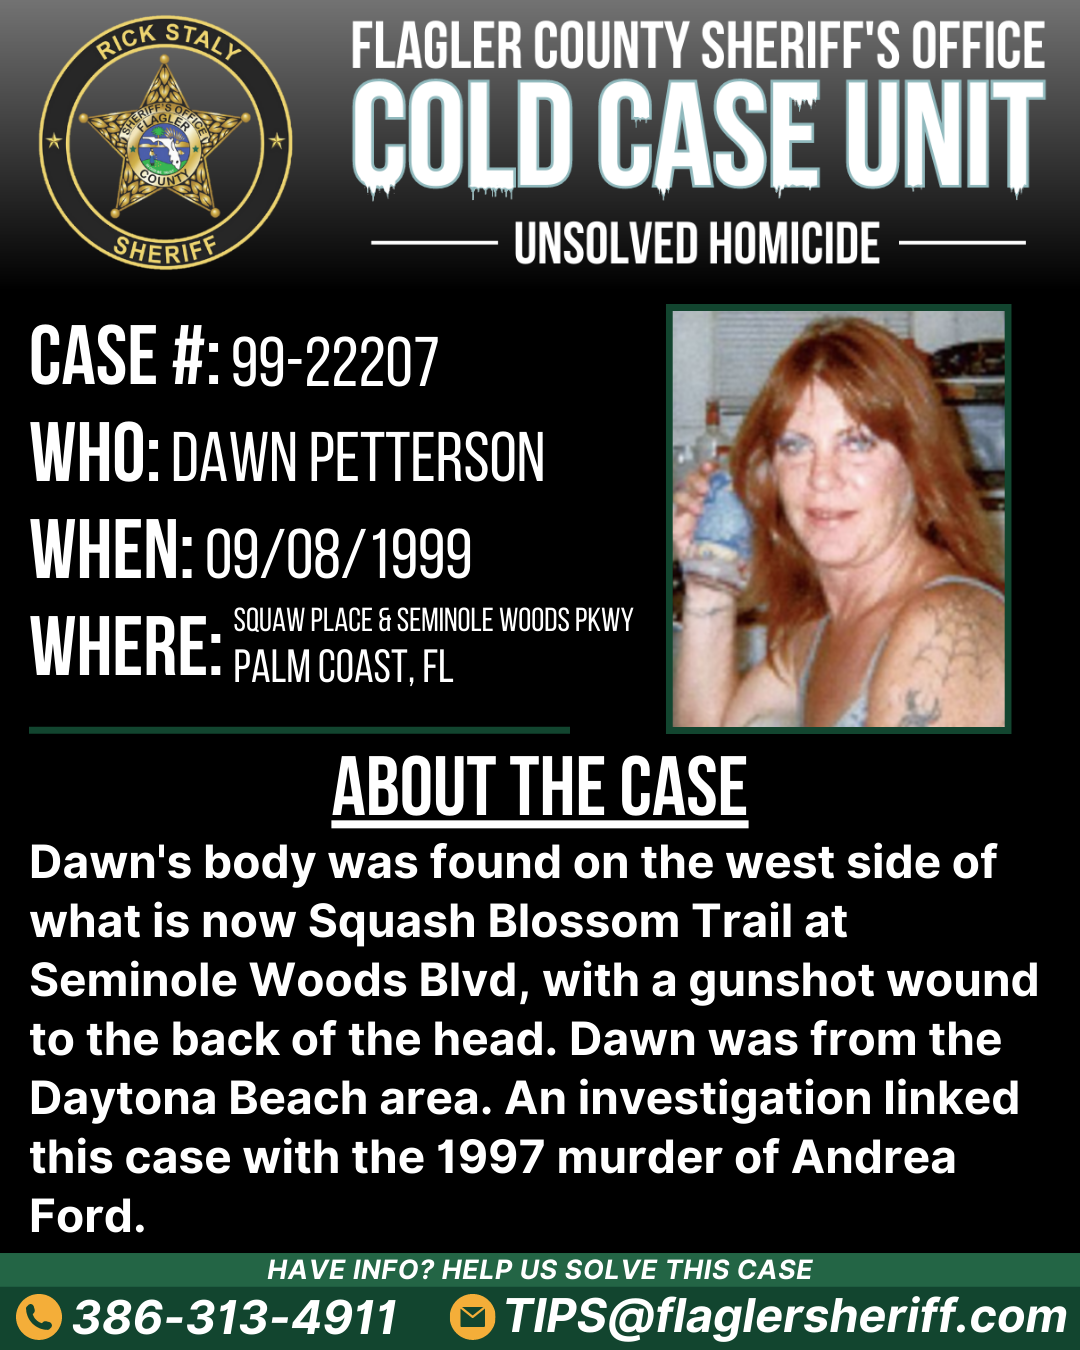 Unsolved homicide. Case #99-22207. Who: Dawn Petterson. When: 09/08/1999. Where: Squaw Place & Seminole Woods Parkway (Palm Coast, FL). About the case: Dawn's body was found on the west side of what is now Squash Blossom Trail at Seminole Woods Blvd, with a gunshot wound to the back of the head. Dawn was from the Daytona Beach area. An investigation linked this case with the 1997 murder of Andrea Ford.